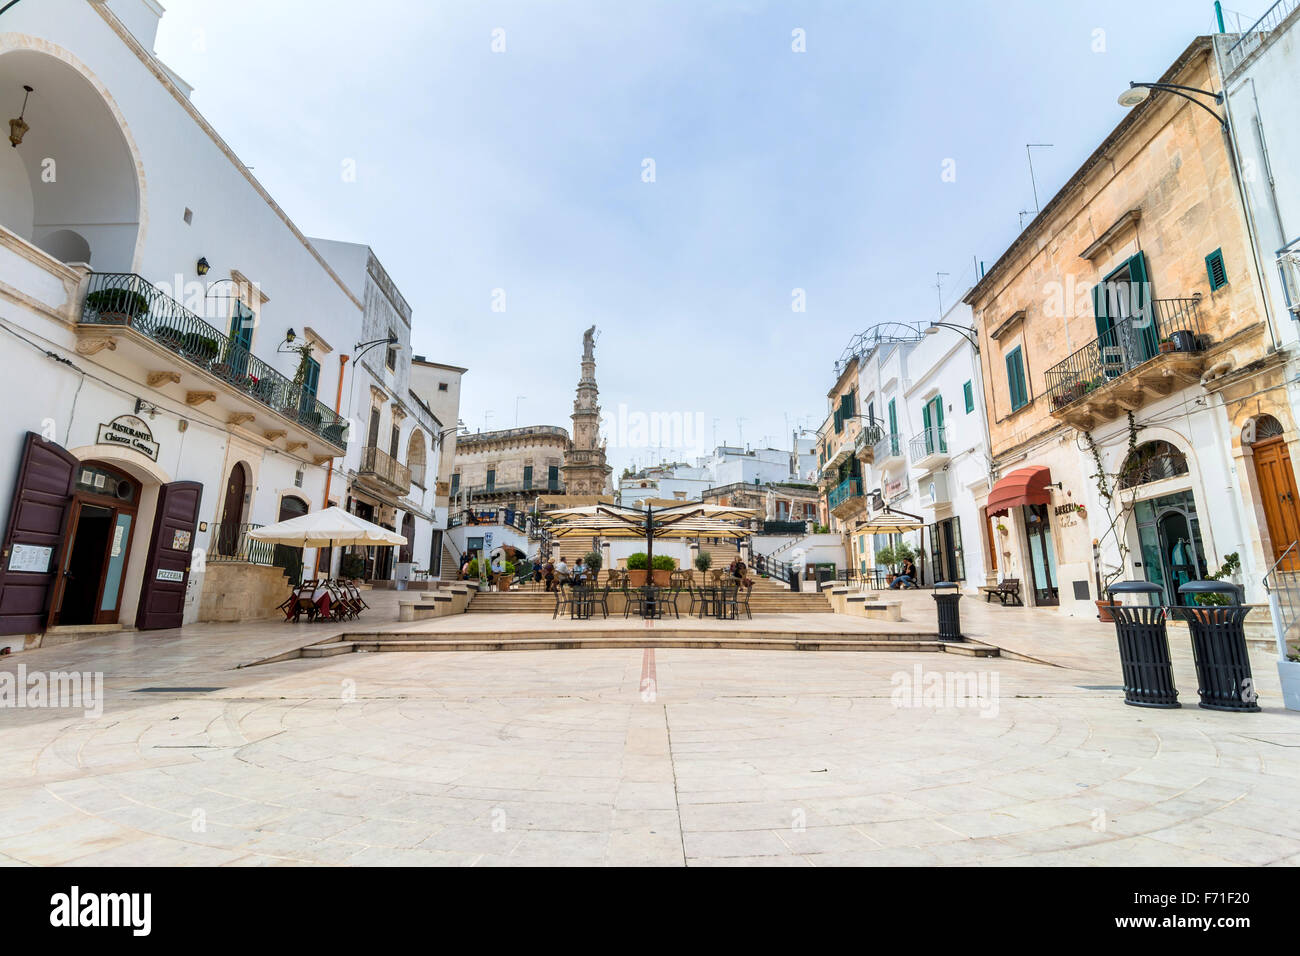 old town and Statue of San Oronzo in Ostuni, Italy Stock Photo